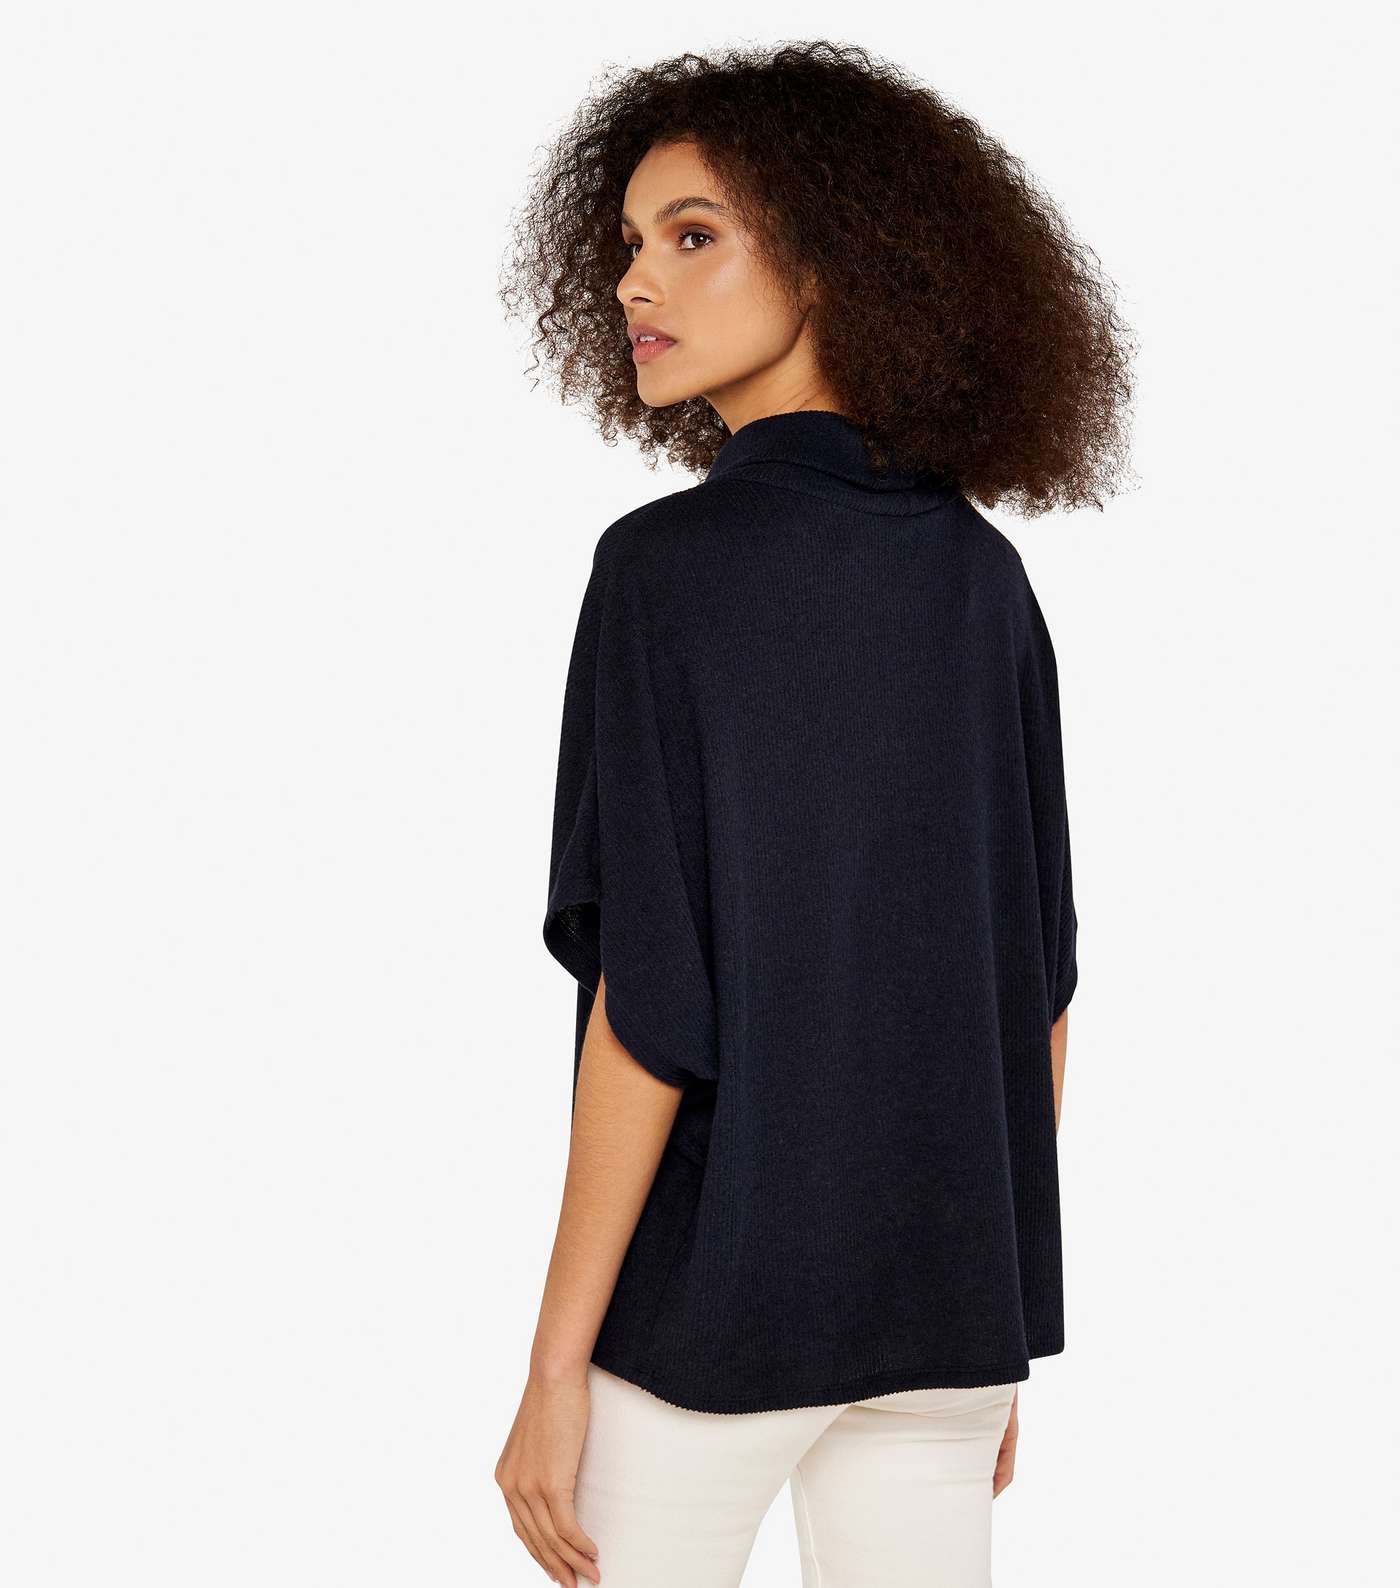 Apricot Navy Ribbed Knit Roll Neck Short Sleeve Jumper Image 3